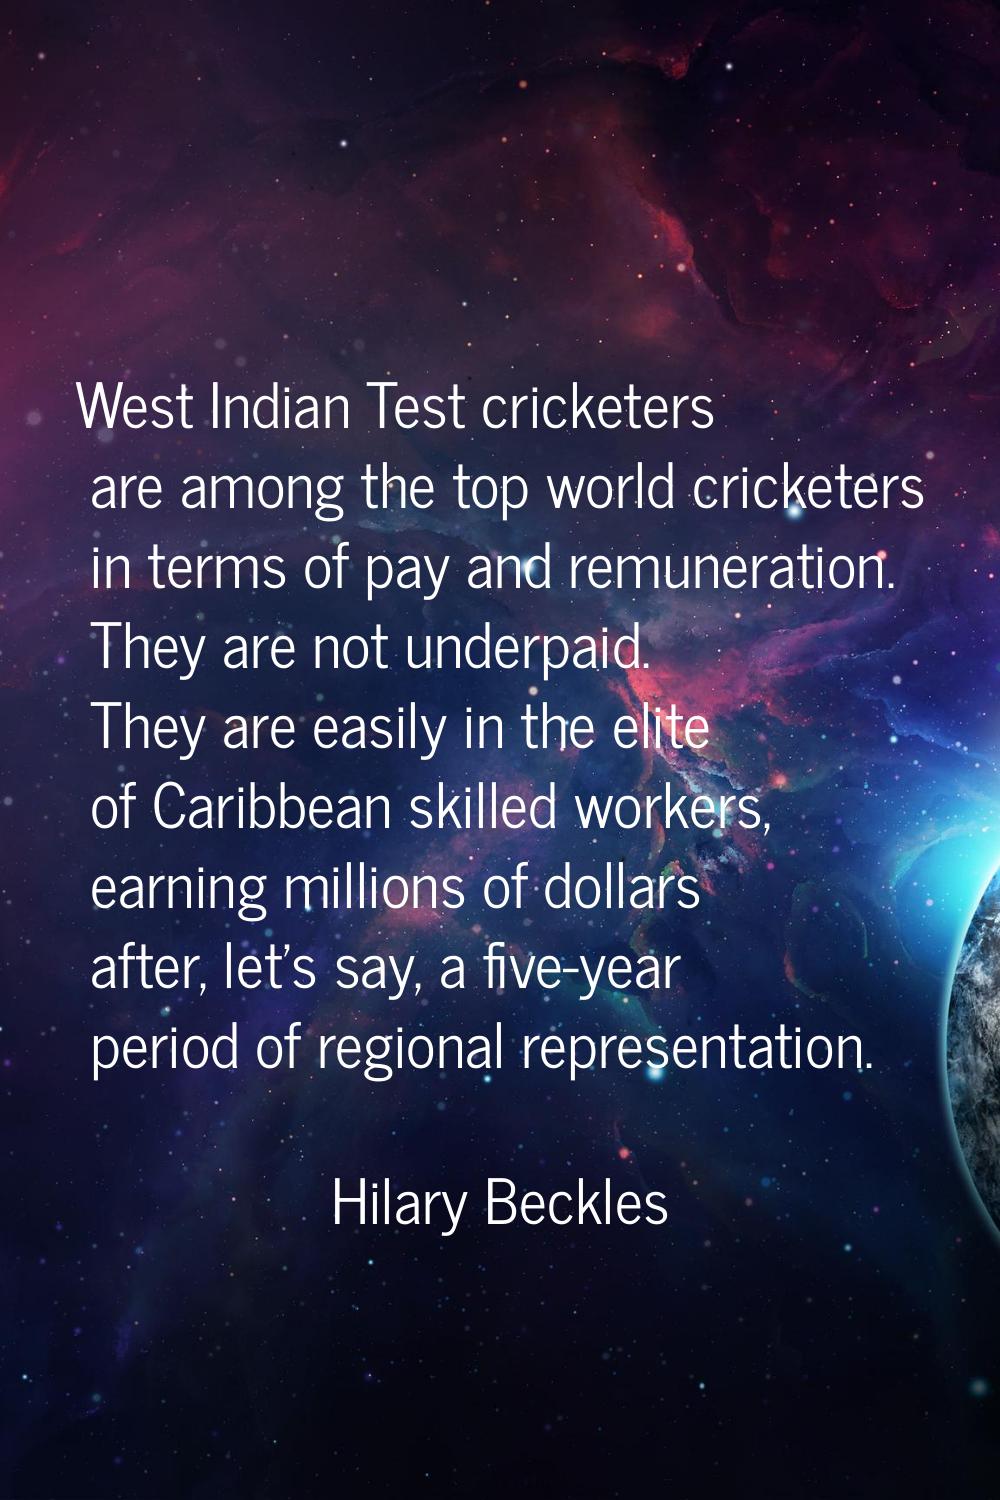 West Indian Test cricketers are among the top world cricketers in terms of pay and remuneration. Th